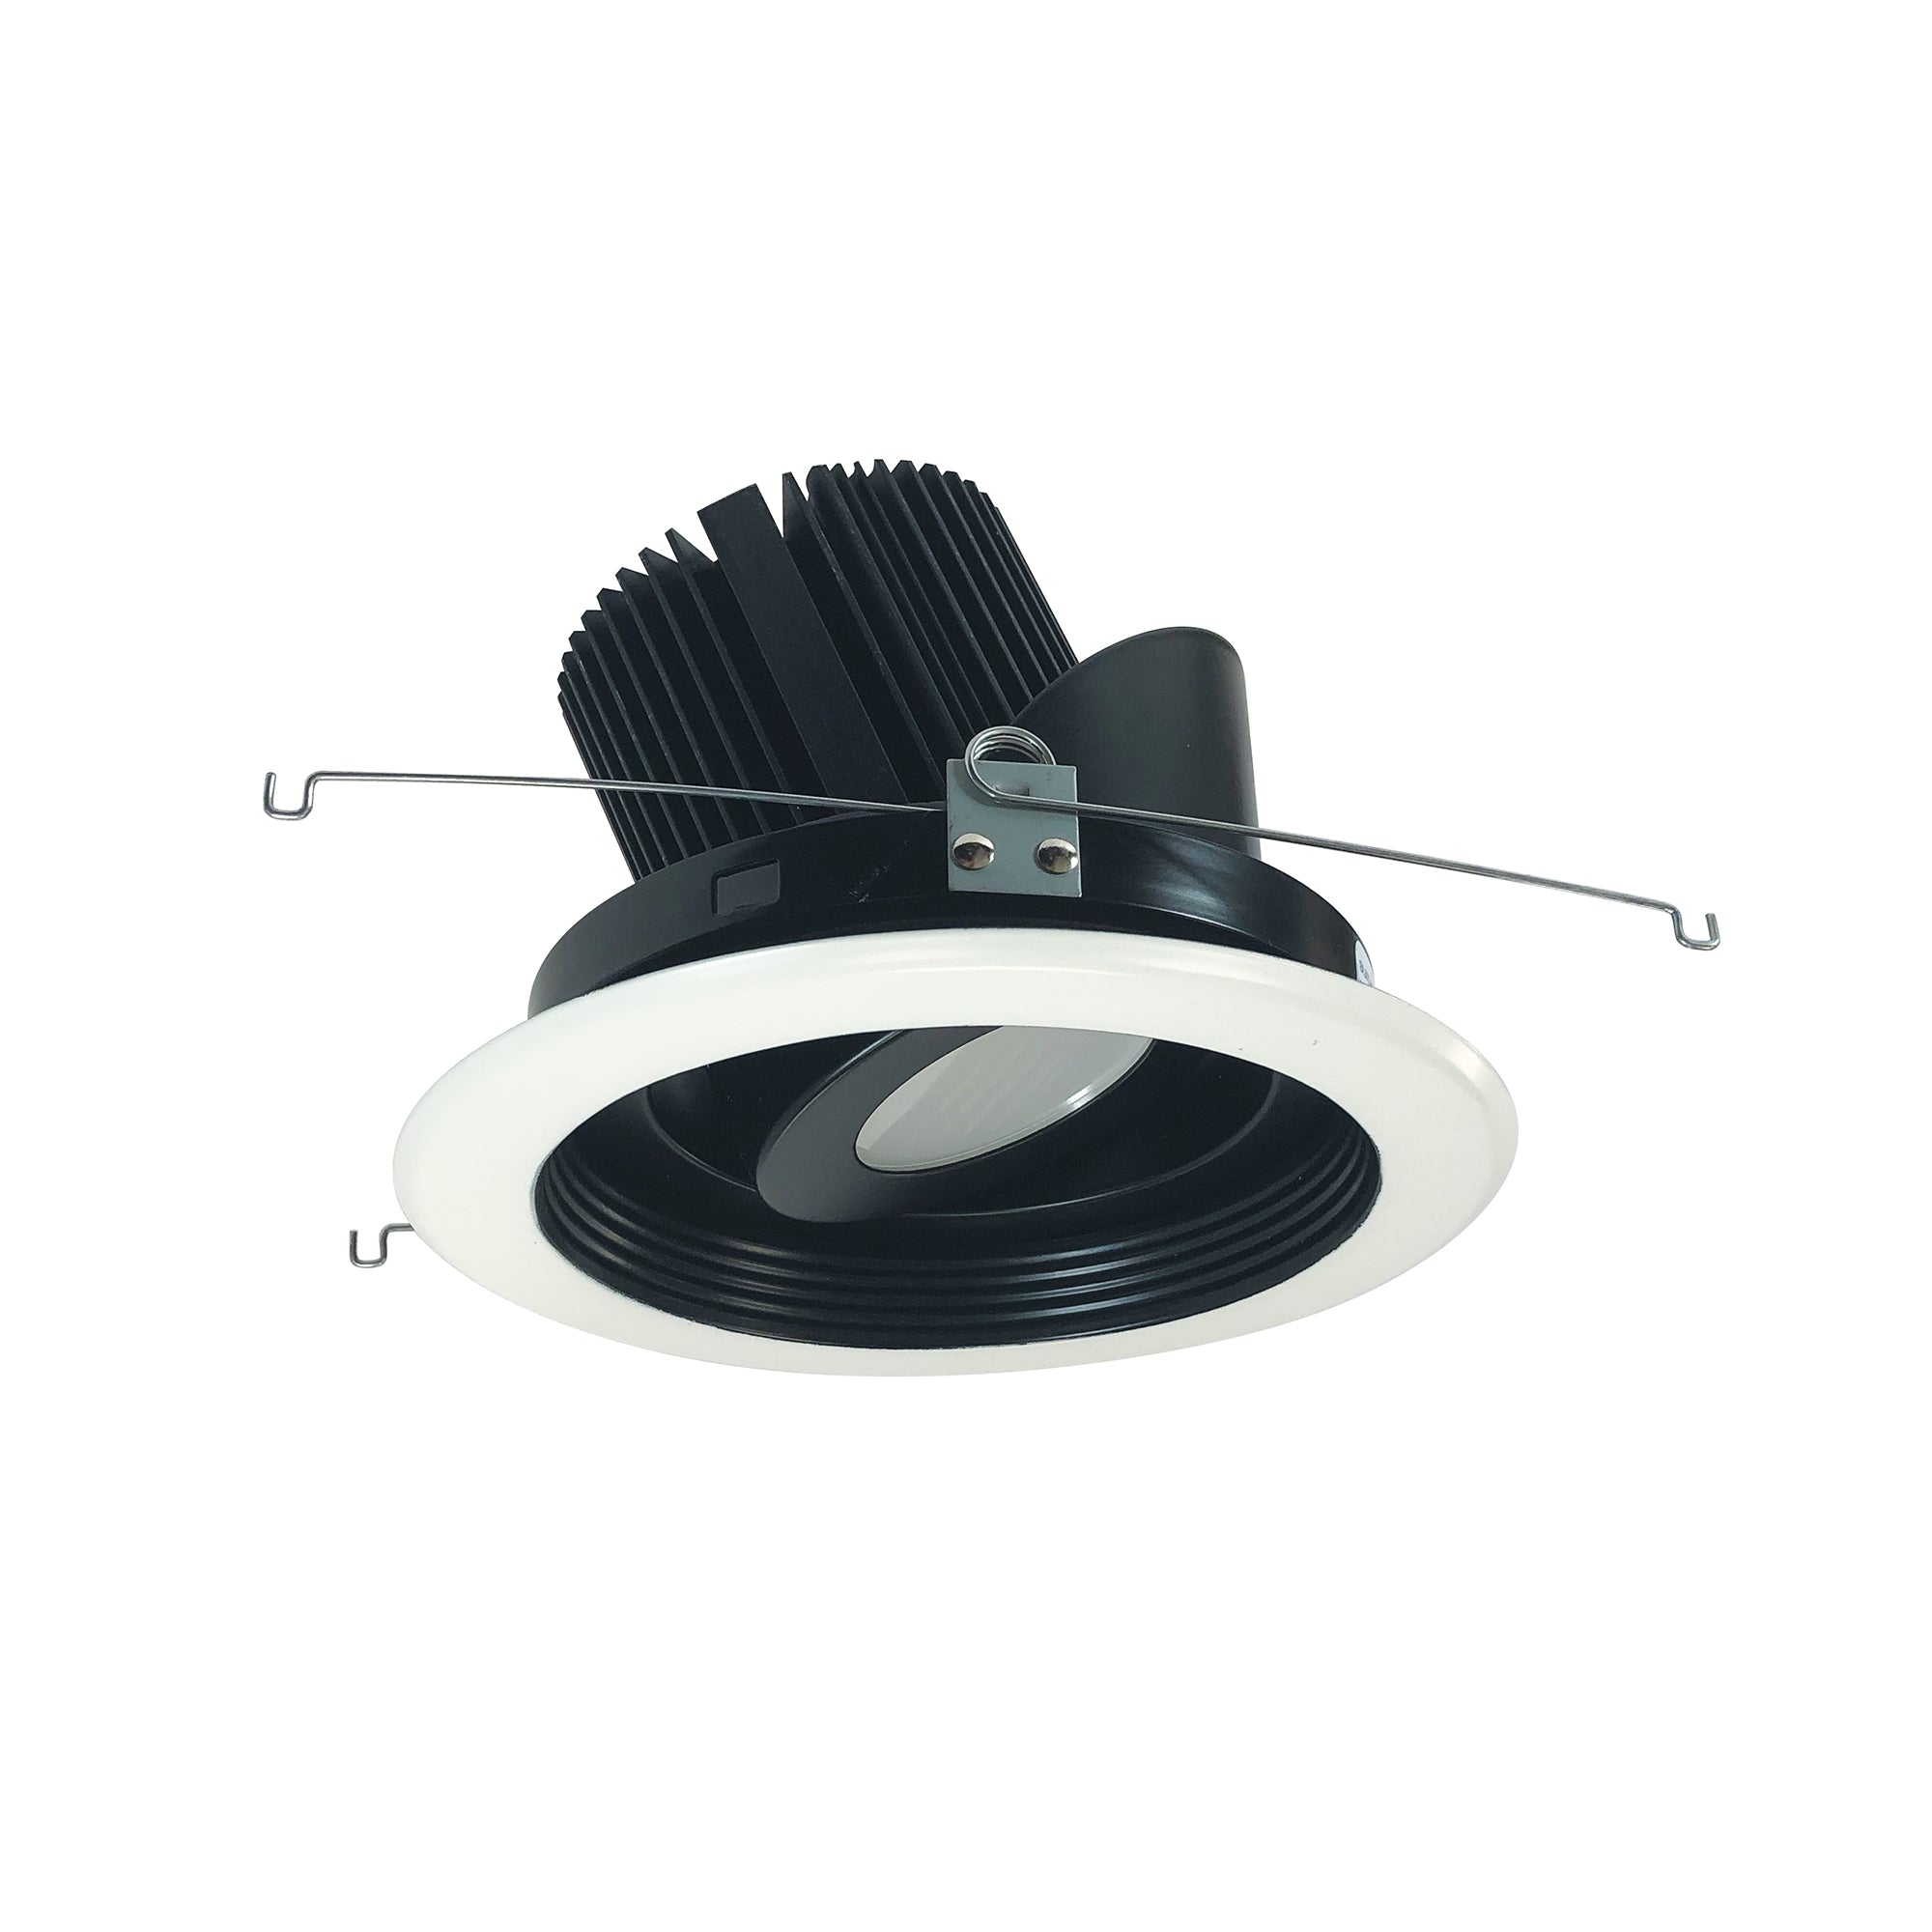 Nora Lighting NRM2-617L2535FBW - Recessed - 6 Inch Marquise II Round Regressed Adj. Baffle, Flood, 2500lm, 3500K, Black/White (Not Compatible with NHRM2-625 Housings)